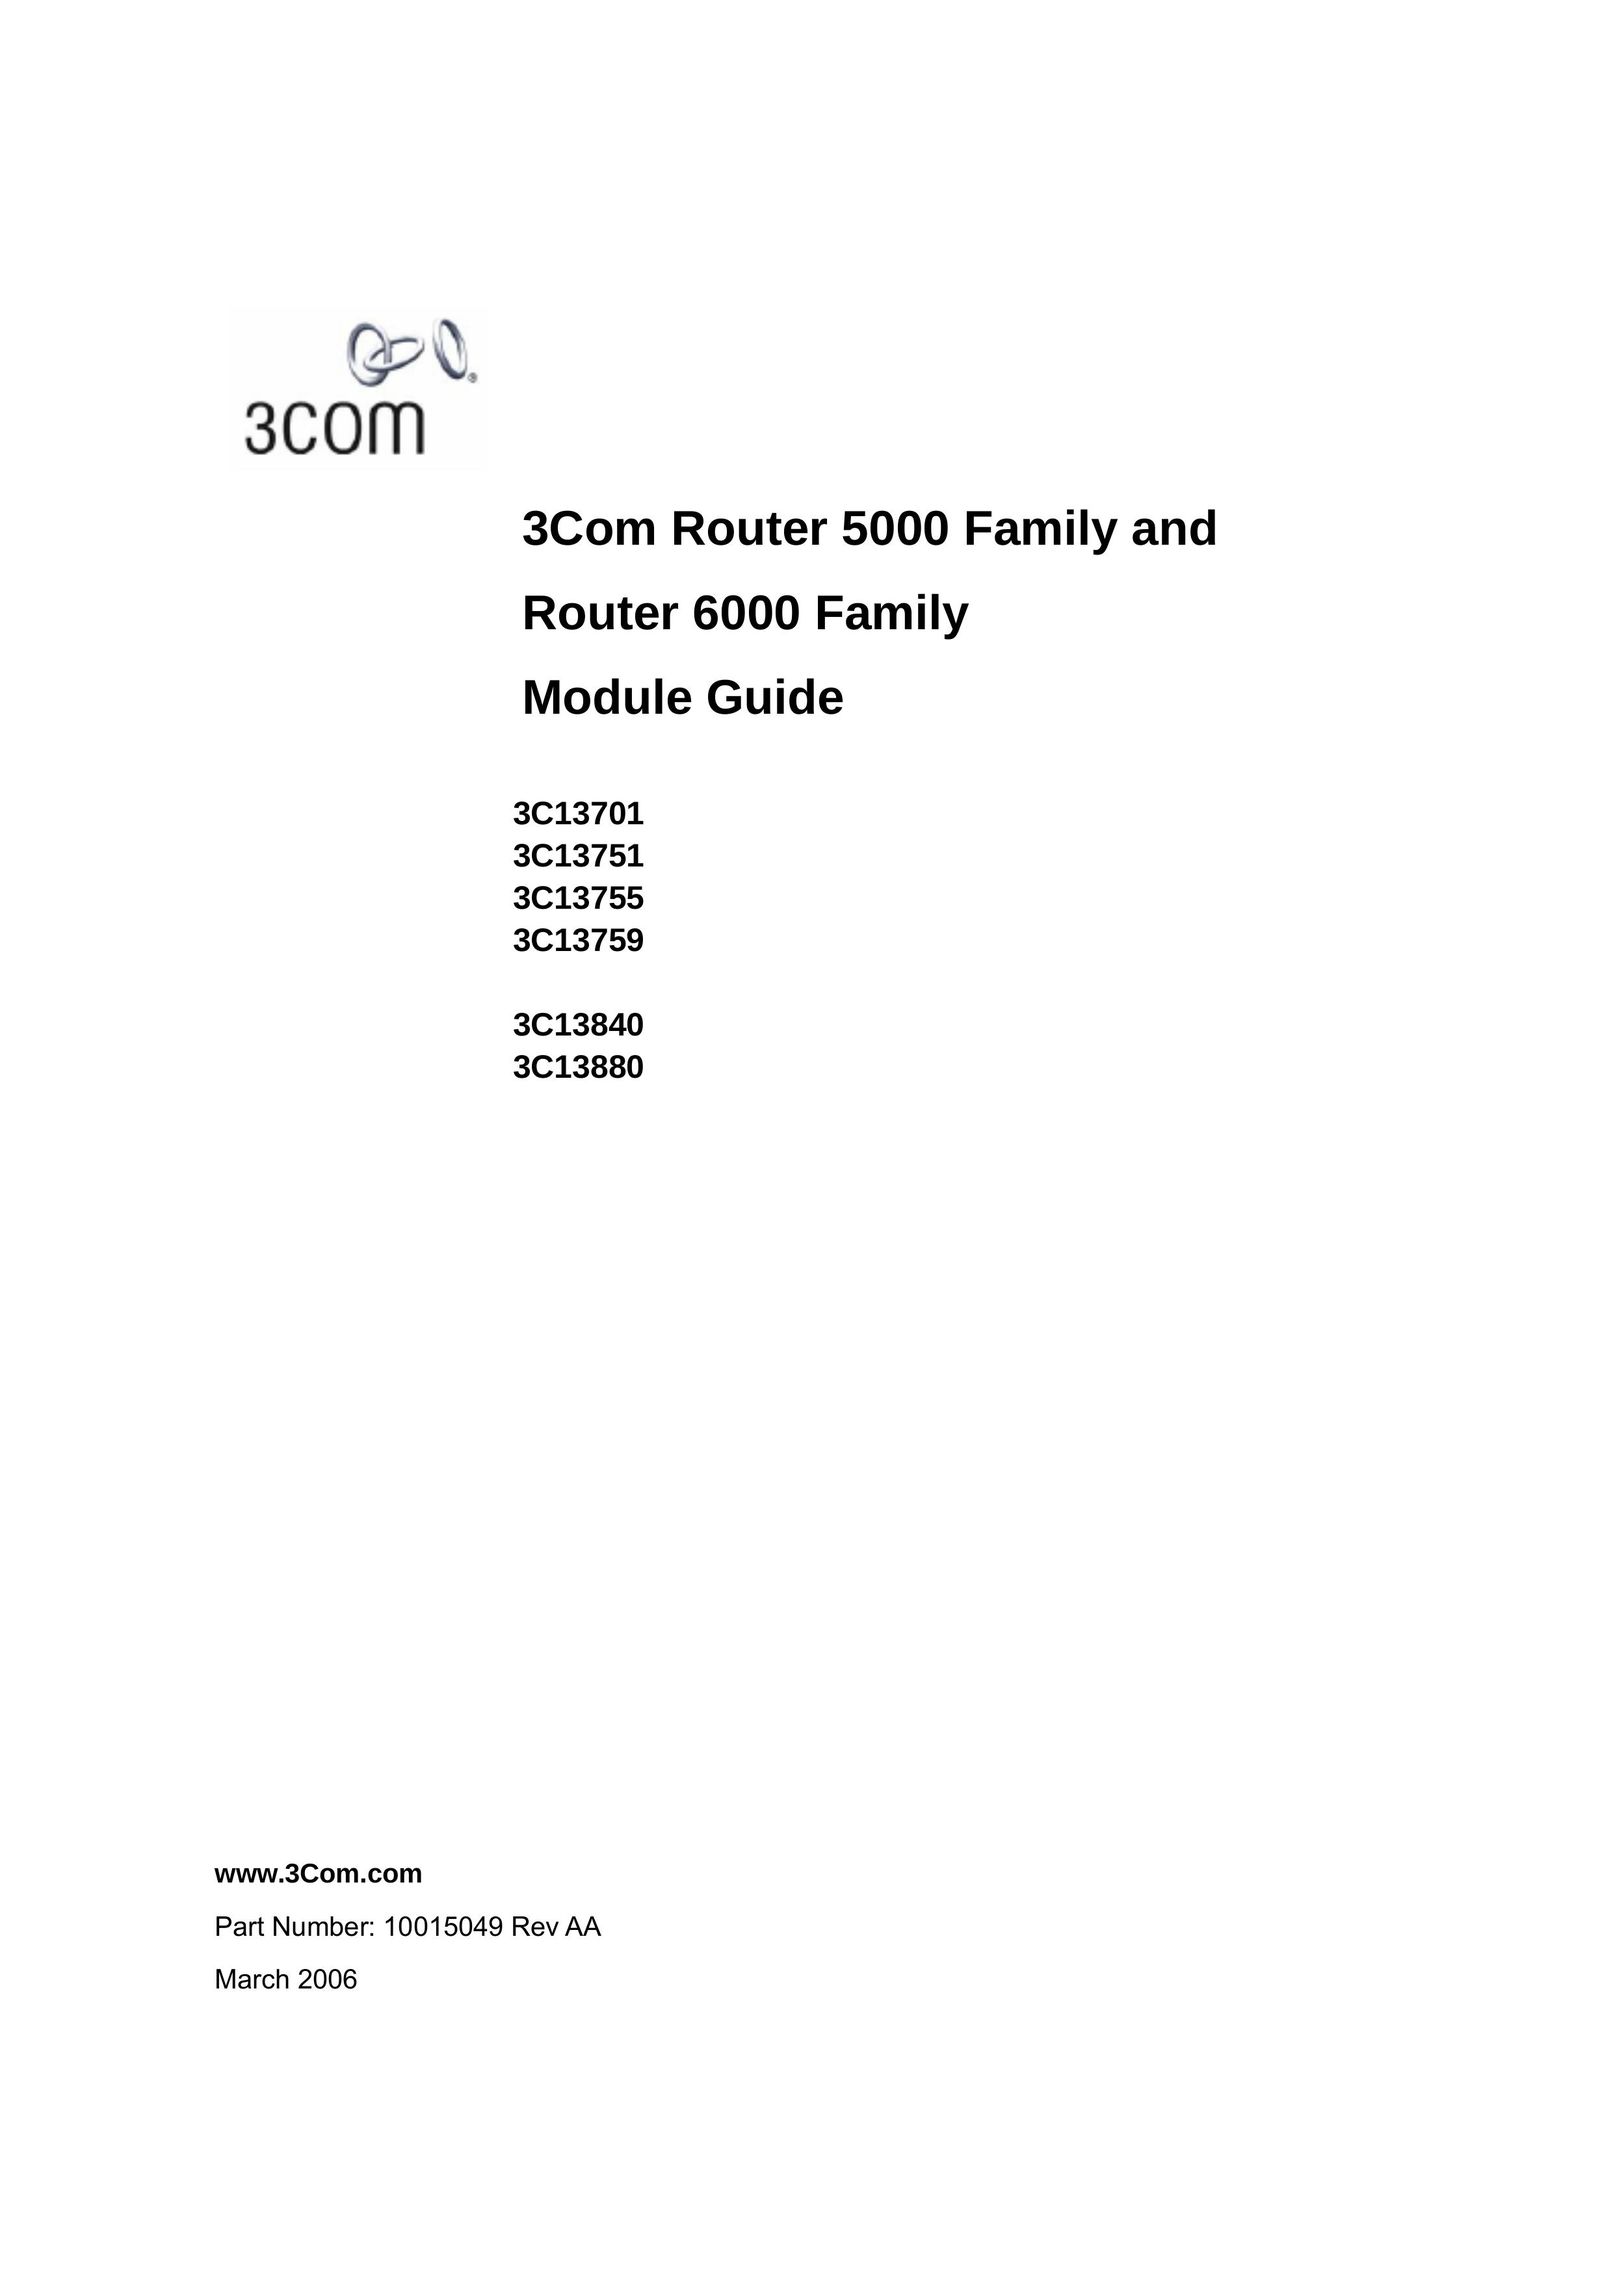 3Com 3C13701 Network Router User Manual